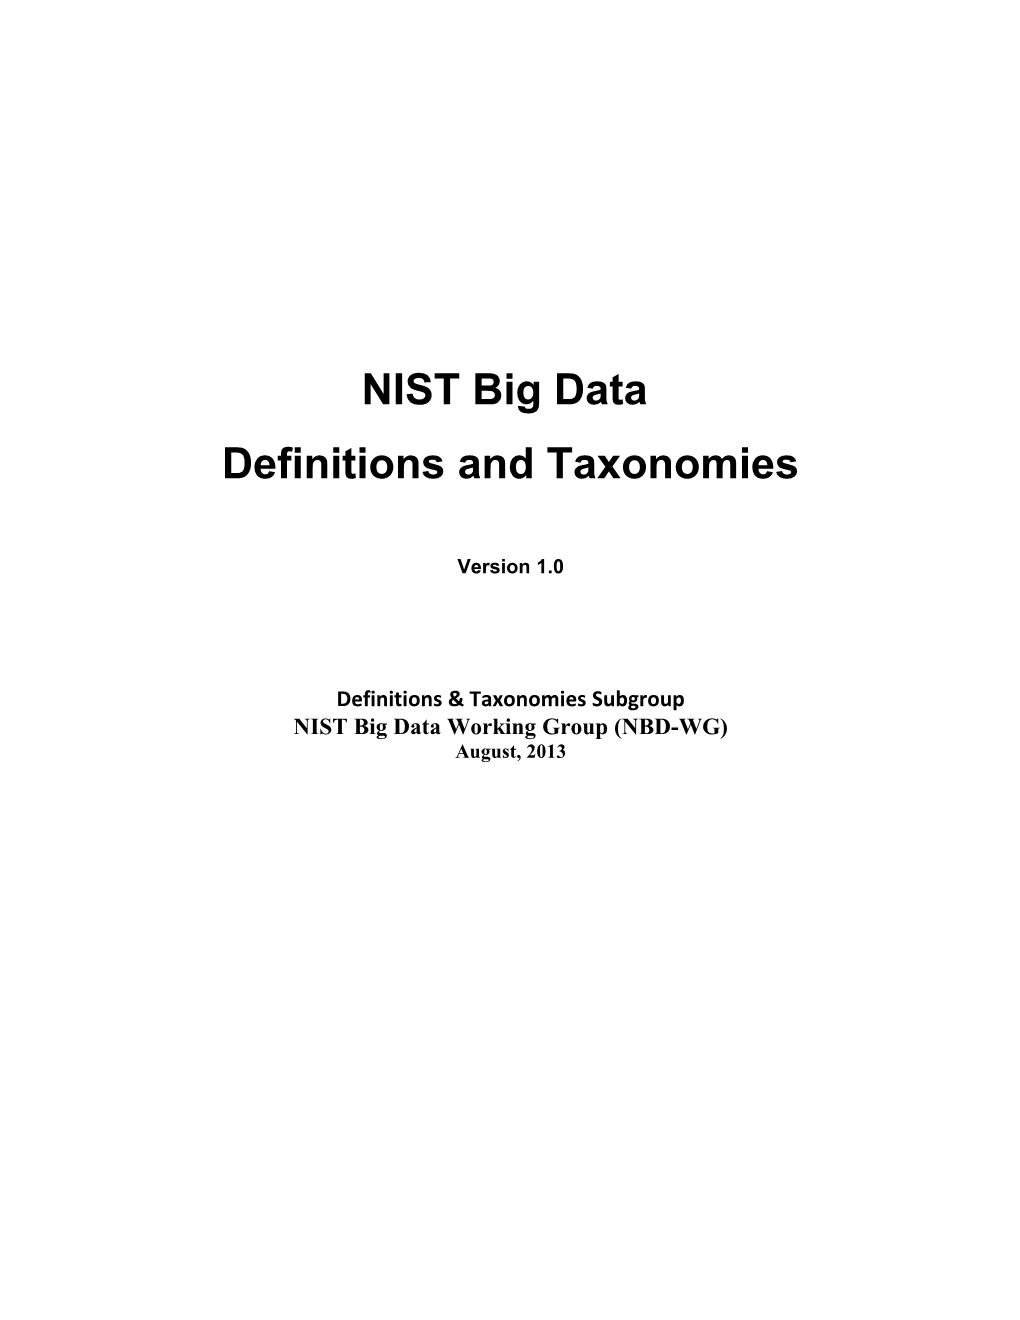 Definitions and Taxonomies